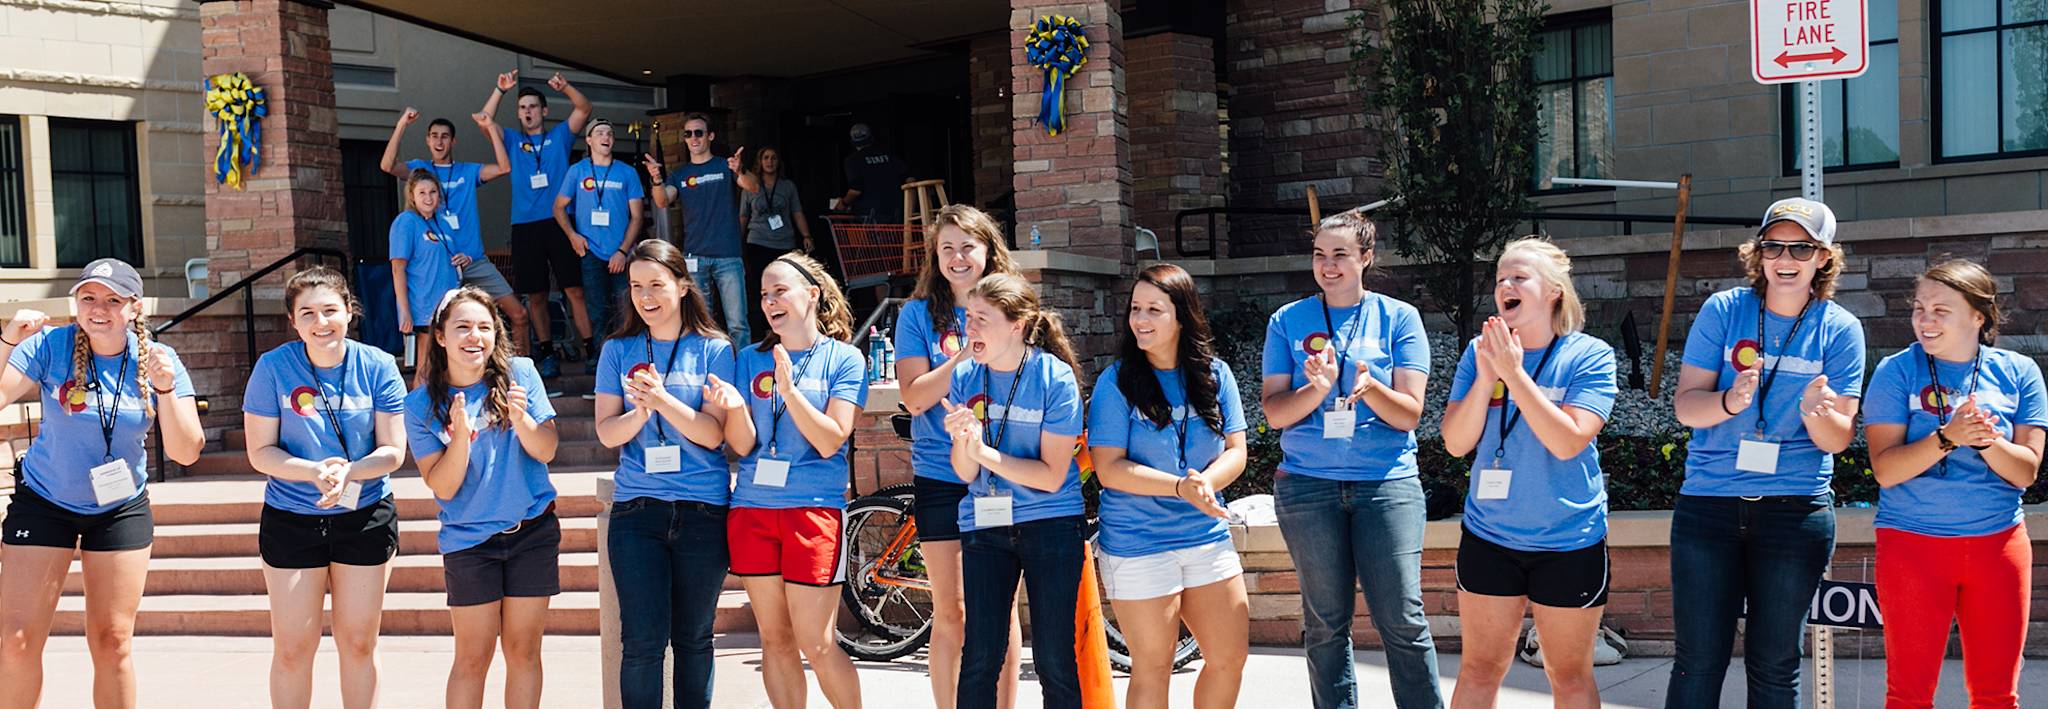 Student move-in-day is taking place at Colorado Christian University.